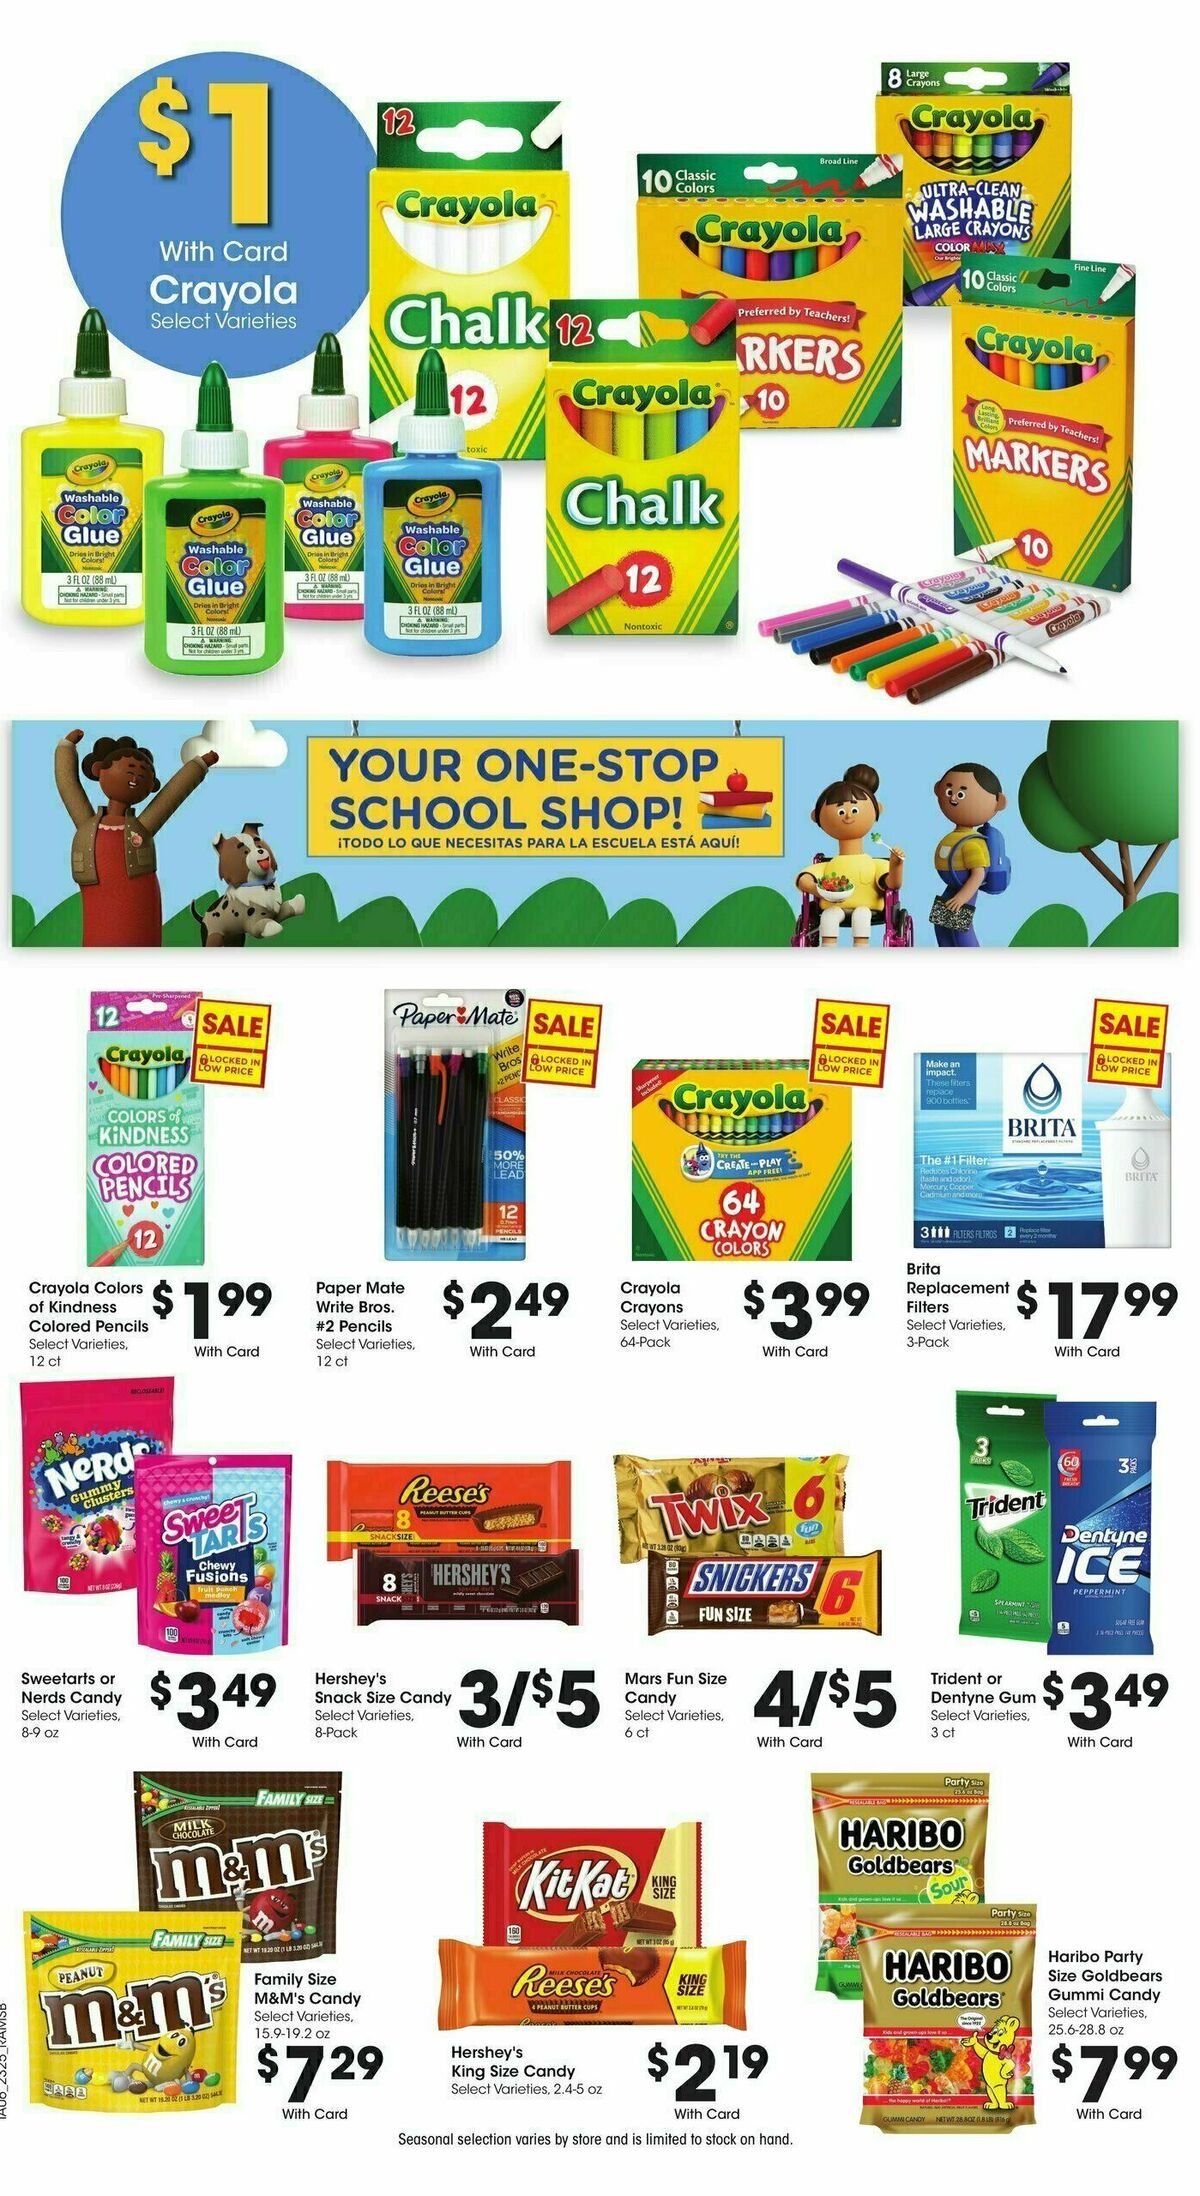 Ralphs Weekly Ad from July 19